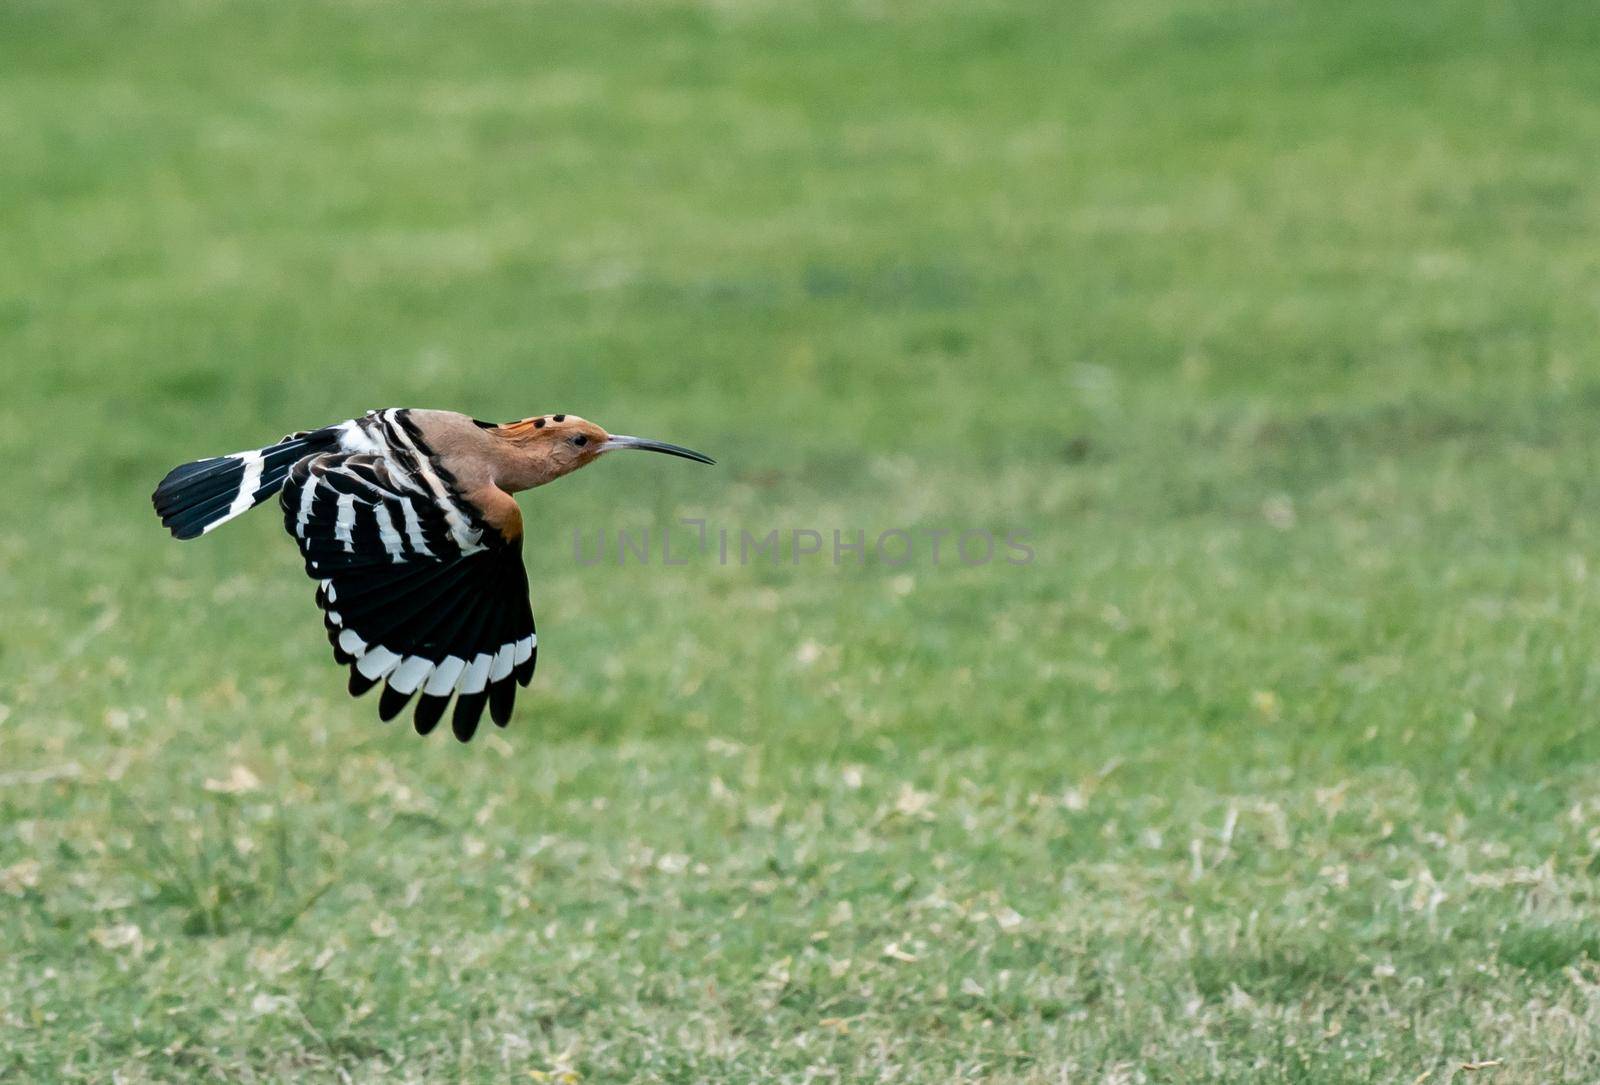 Eurasian hoopoe (Upupa epops) flying searching for food on the green yard. by sirawit99